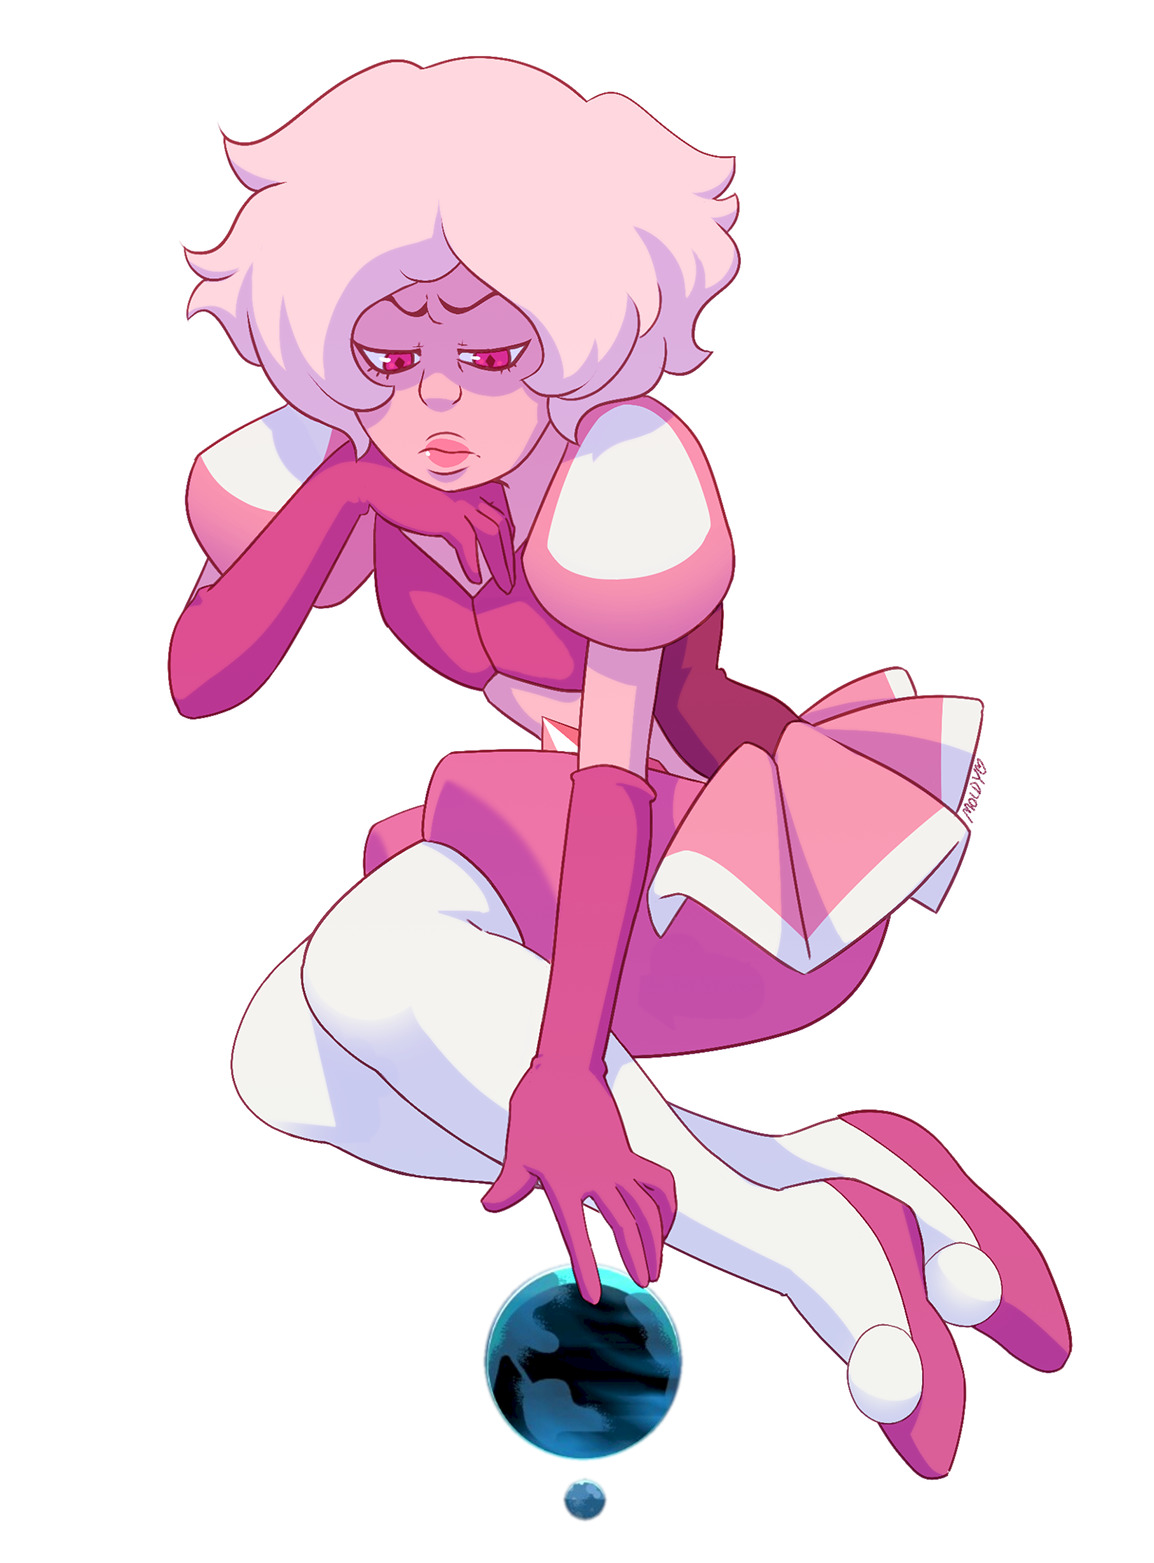 I realized I hadn’t drawn Pink Diamond at all since her reveal, so here she is